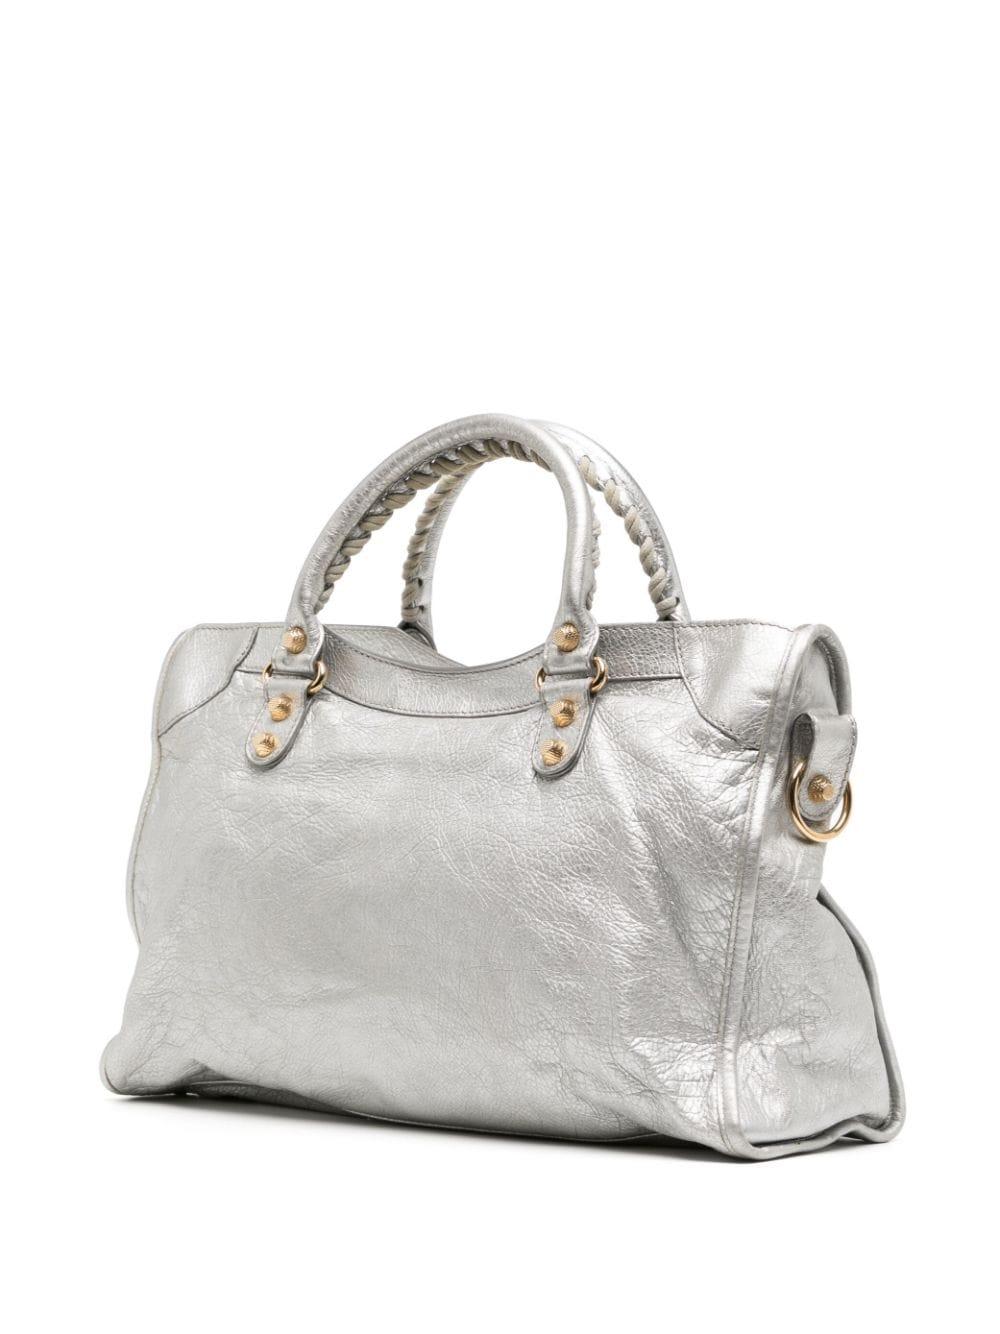 * Silver-tone wrinkled calf leather
* Gold-tone stud detailing
* Decorative buckle detailing
* Leather mirror tag
* Two rolled top handles
* Detachable shoulder strap
* Top zip fastening
* Front zip-fastening pocket
* Internal zip-fastening pocket
*